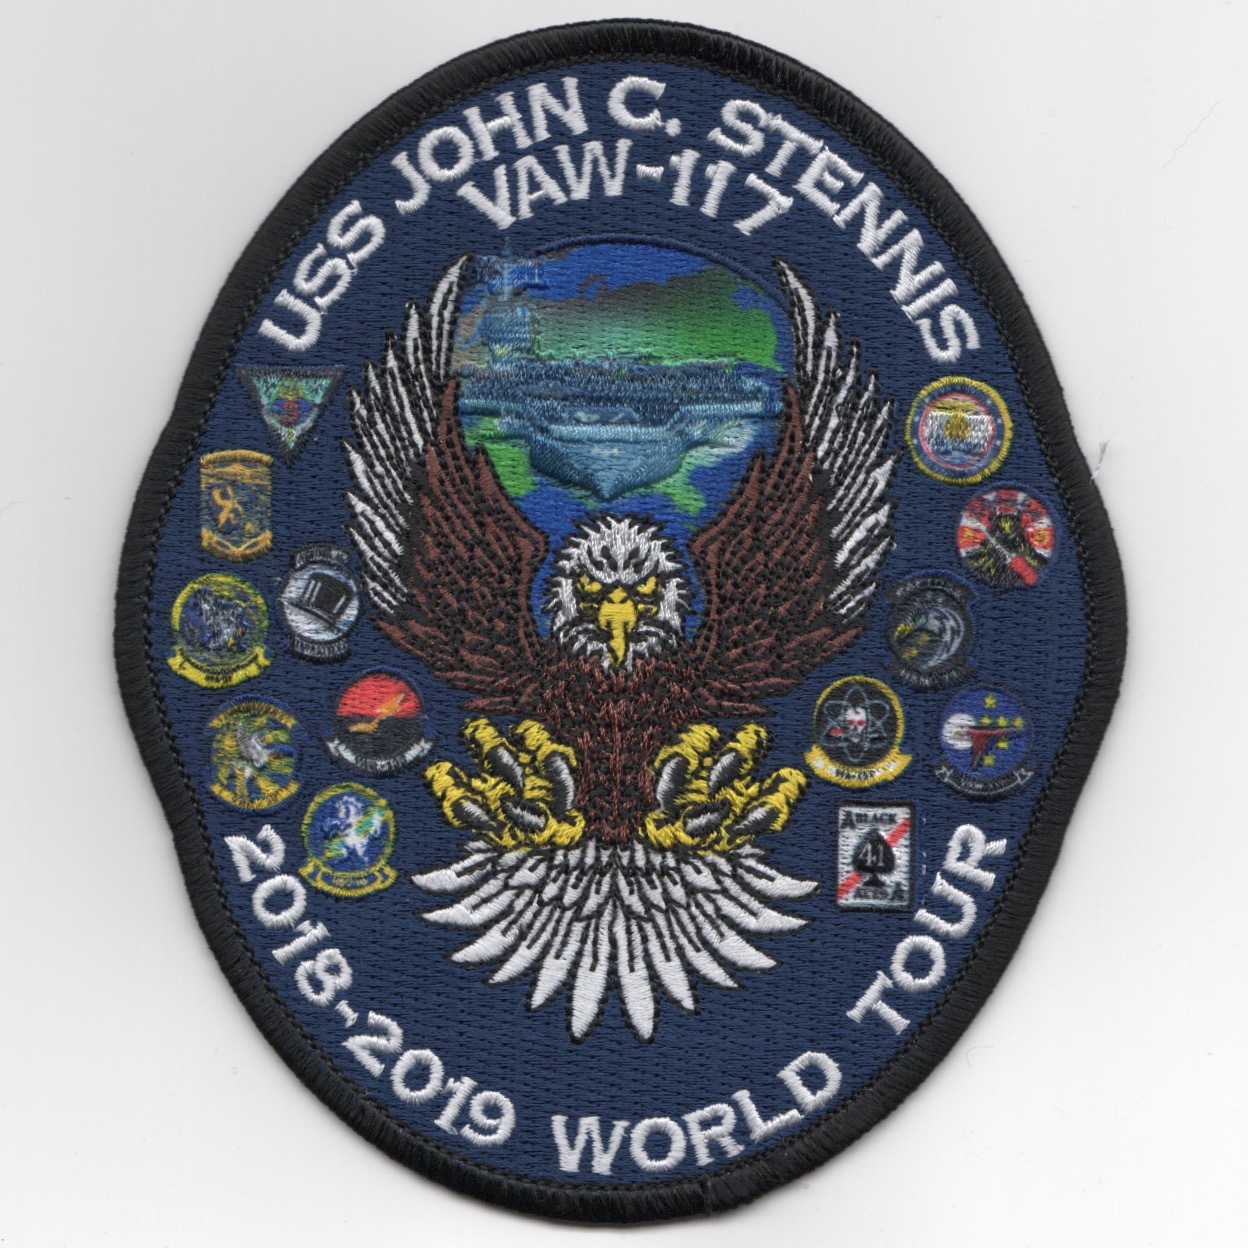 VAW-117 2019 'WORLD TOUR' Cruise Patch